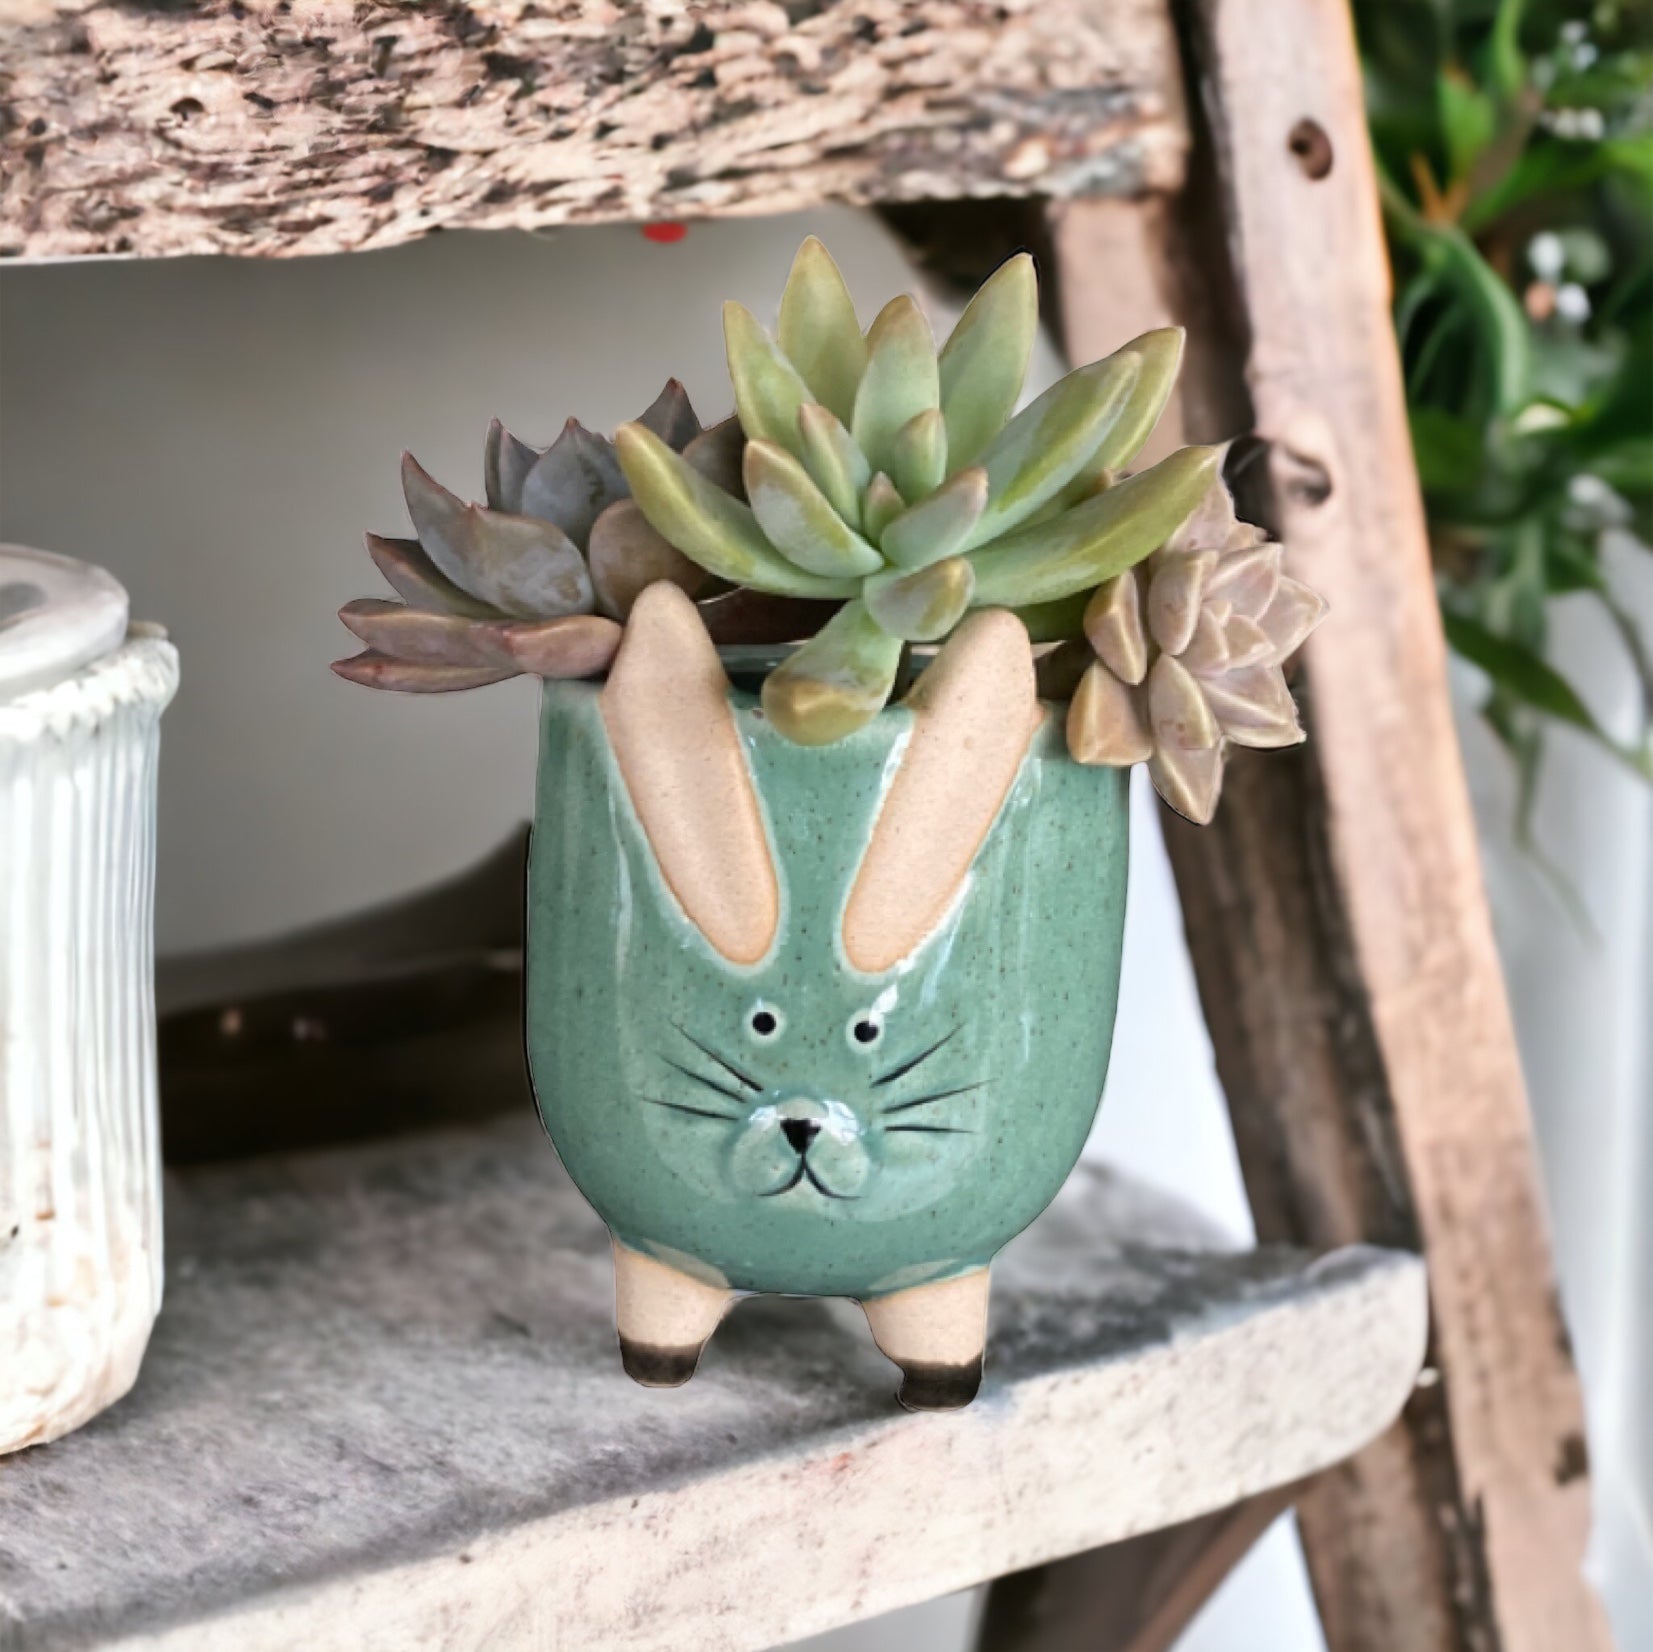 Plant Pot Planter Rabbit Greenery - The Renmy Store Homewares & Gifts 